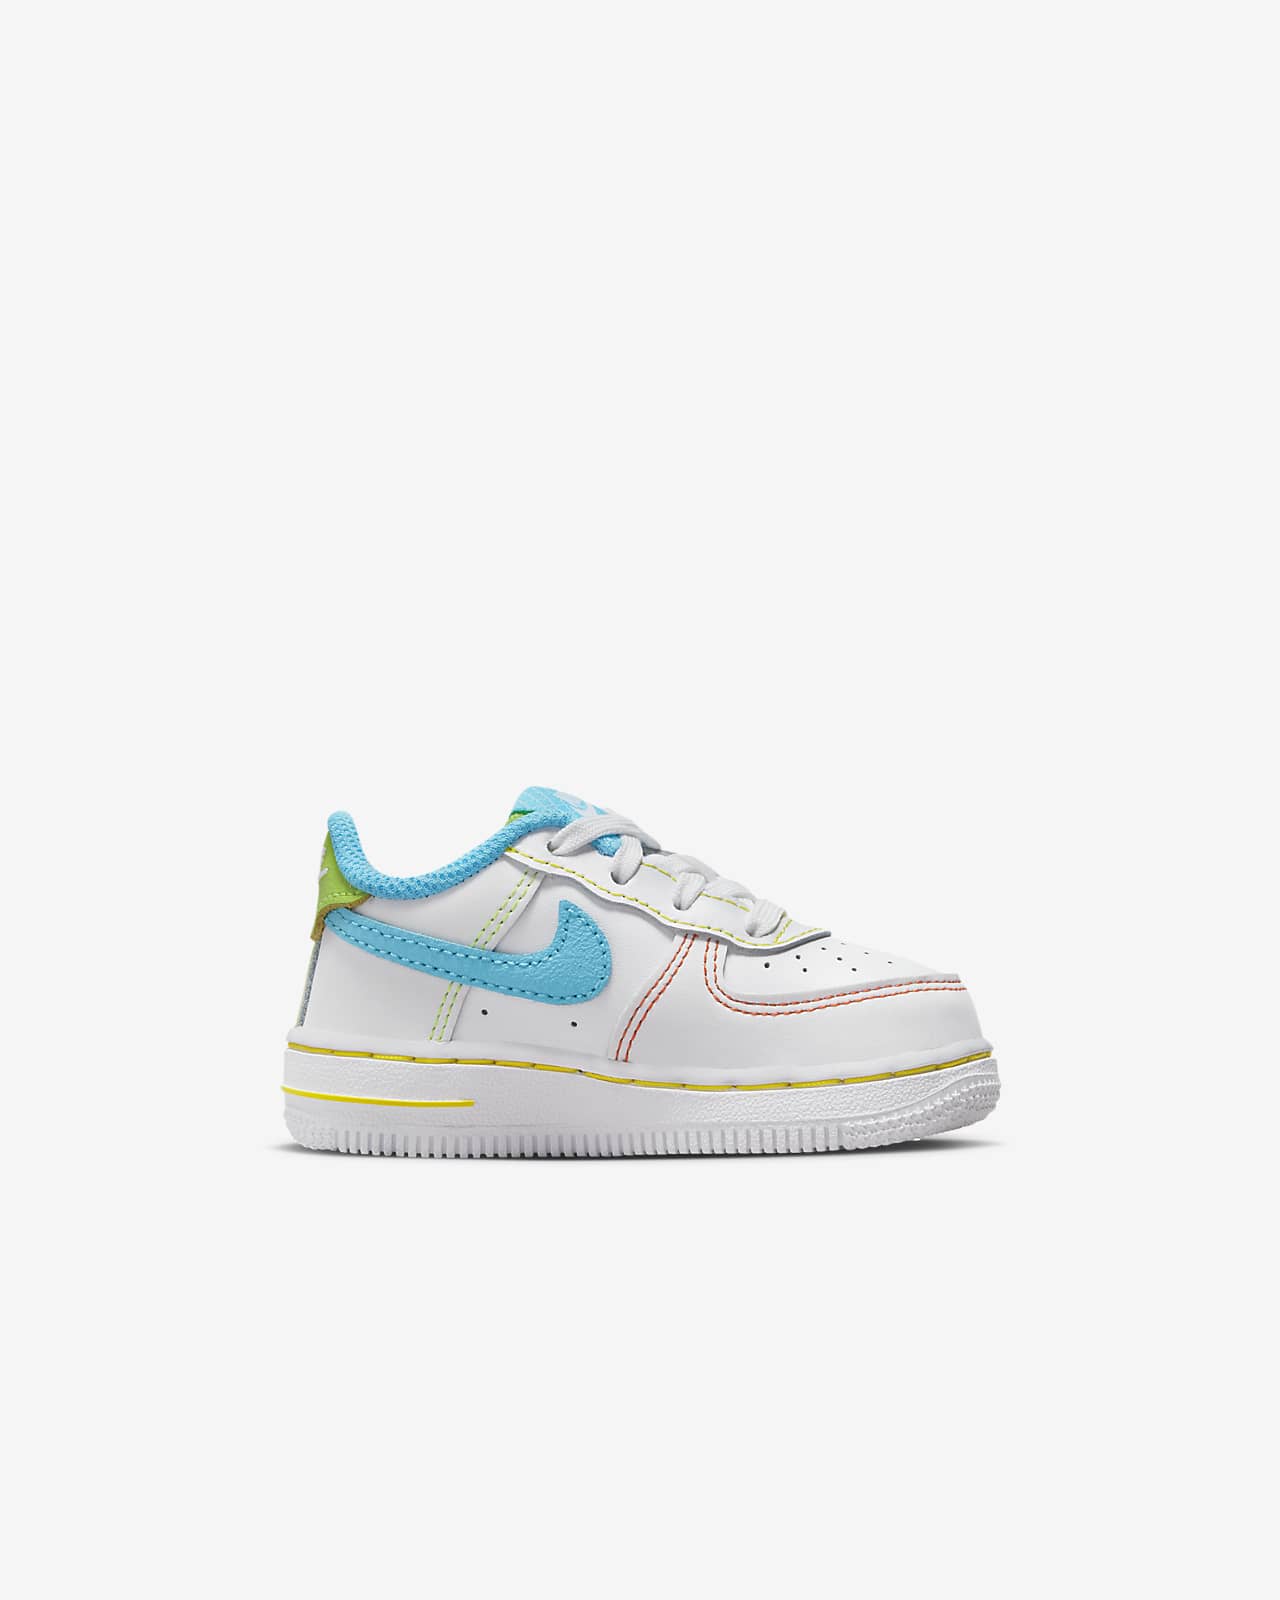 Nike Force 1 LV8 Baby/Toddler Shoes in Blue, Size: 8C | FV4500-423